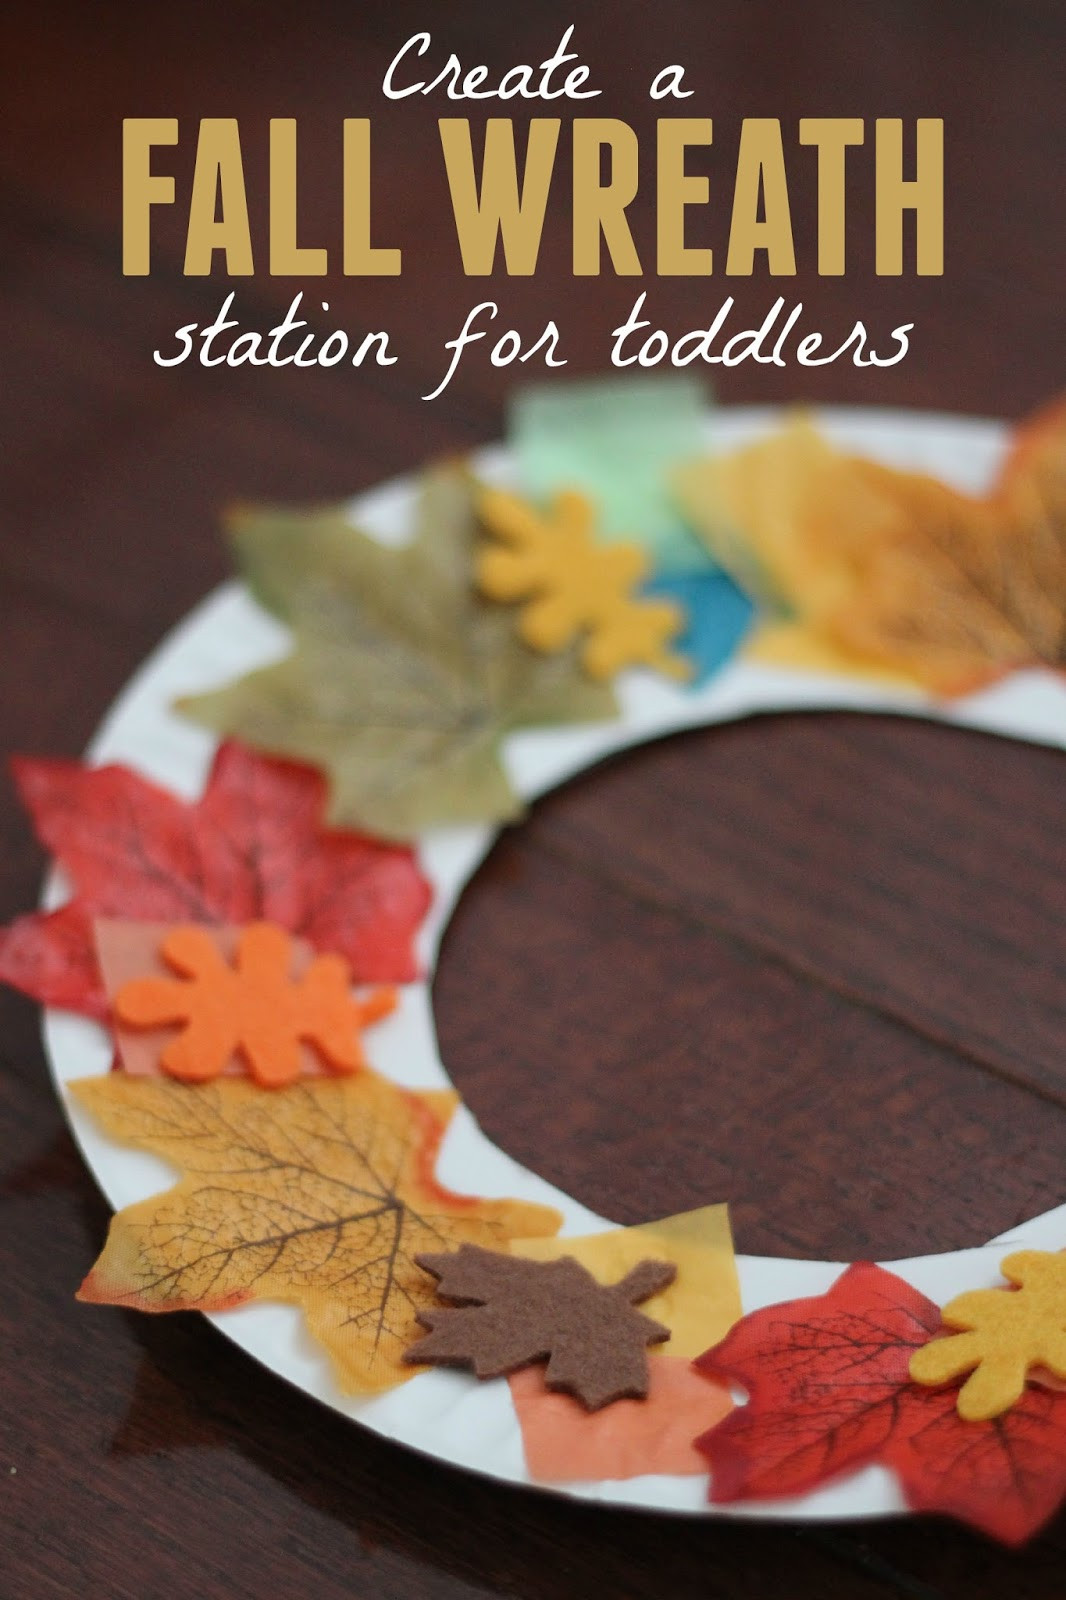 Fall Craft Ideas For Preschoolers
 Toddler Approved Fall Wreath Making Station for Toddlers